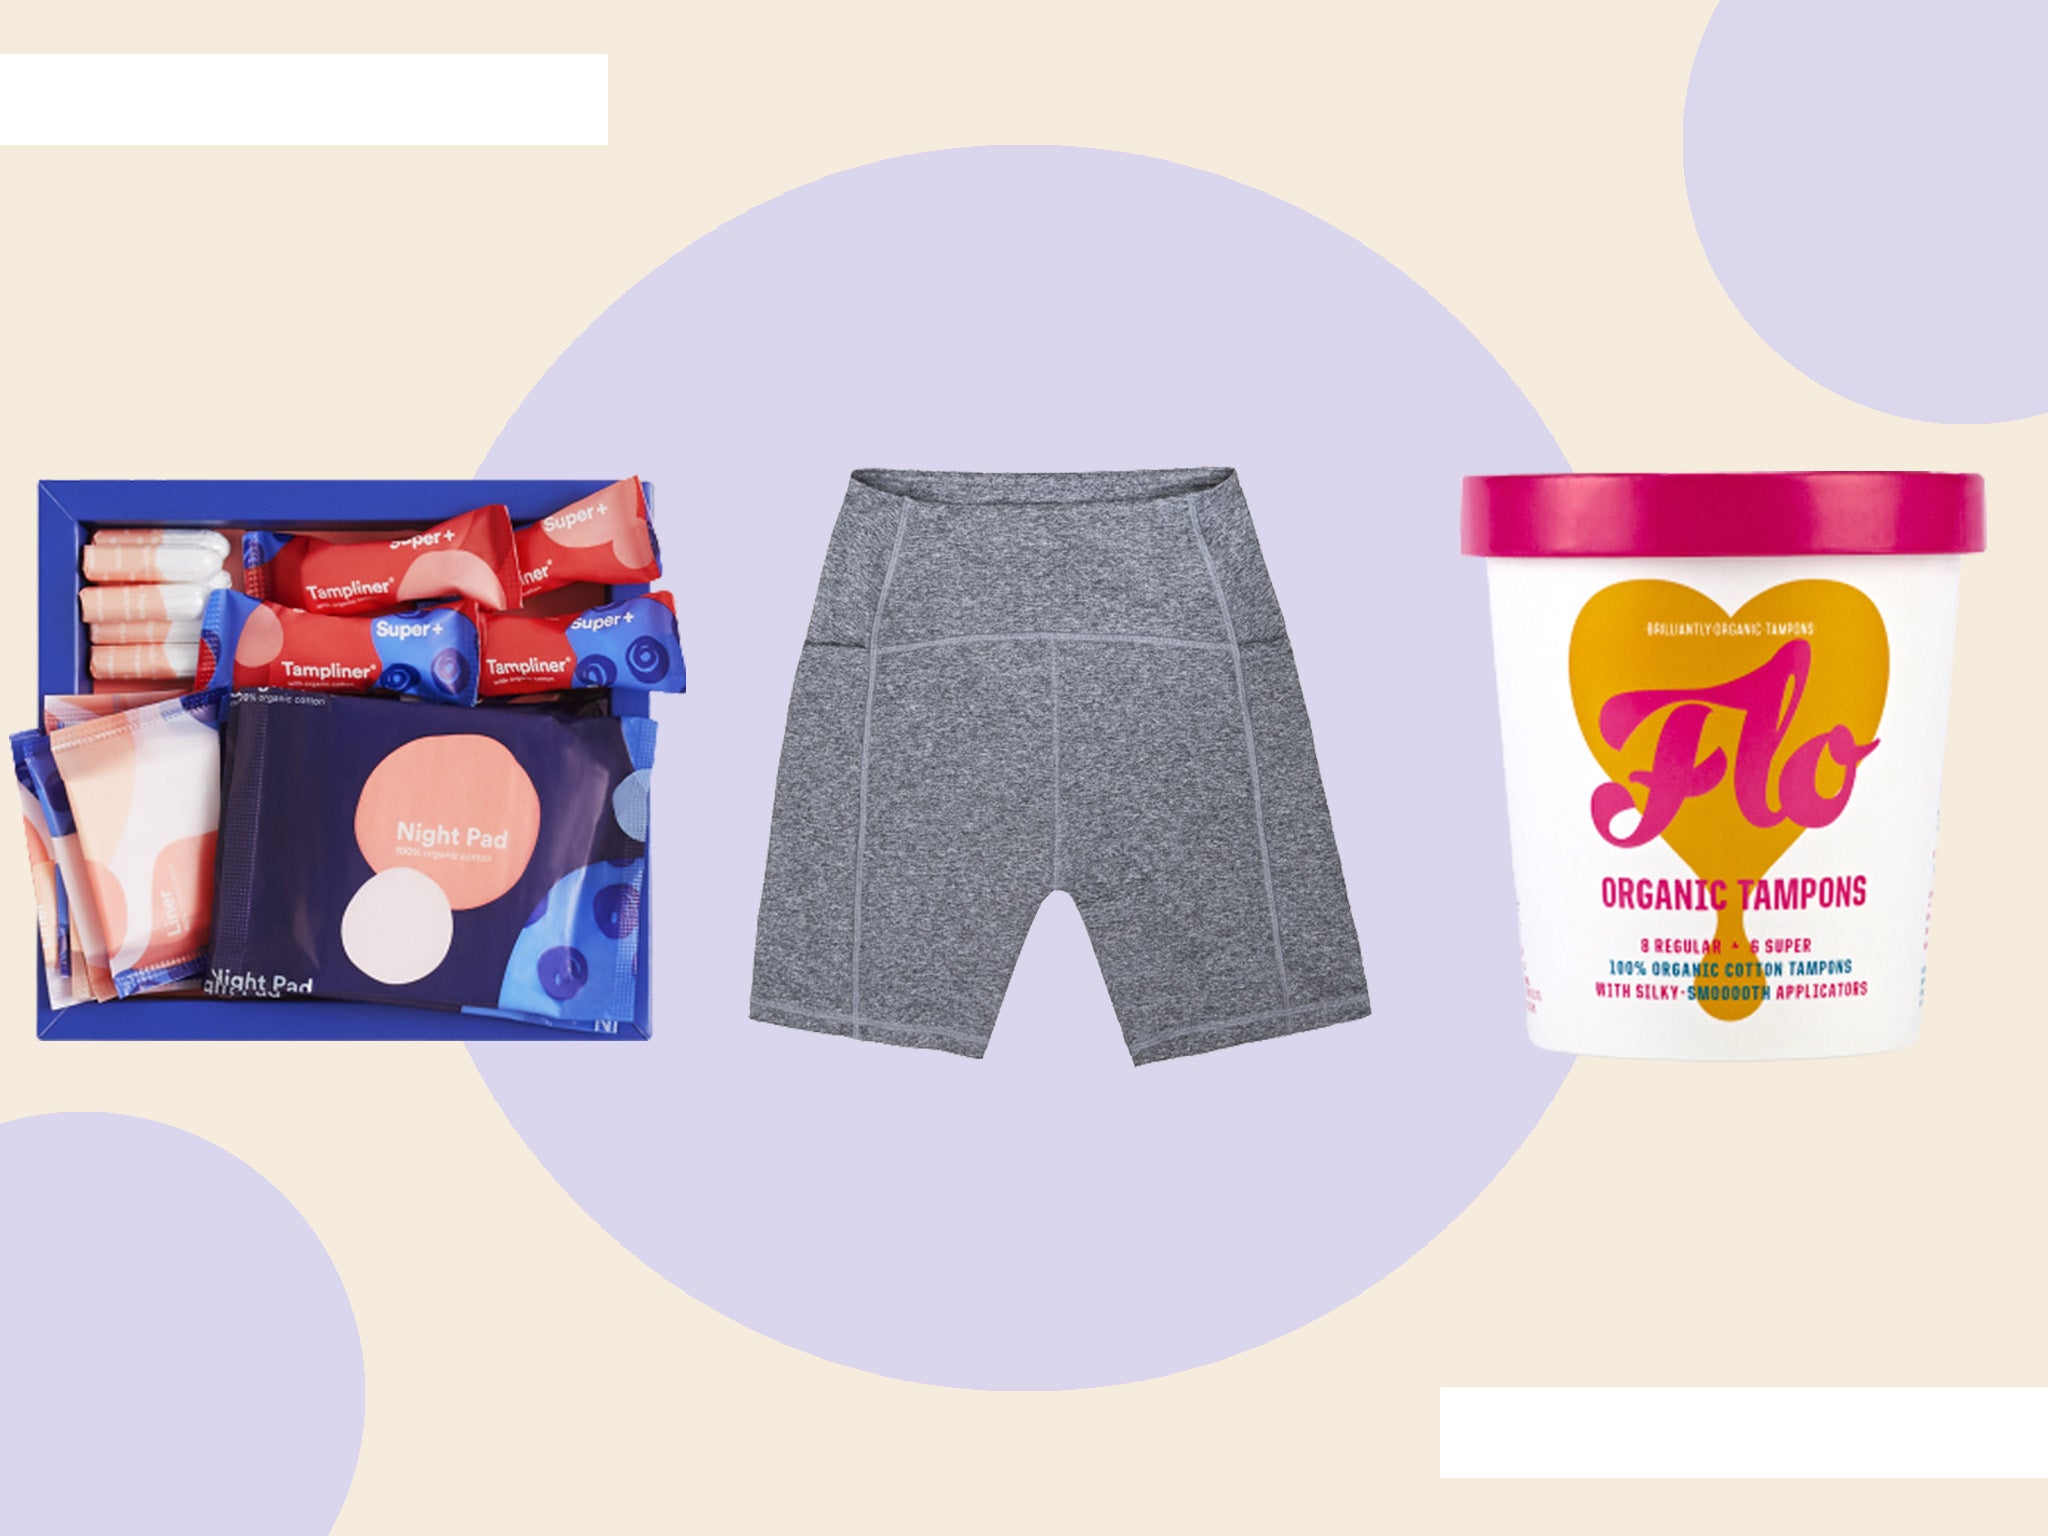 No need to use tampons: New period-friendly gym shorts launched by  underwear brand, The Independent